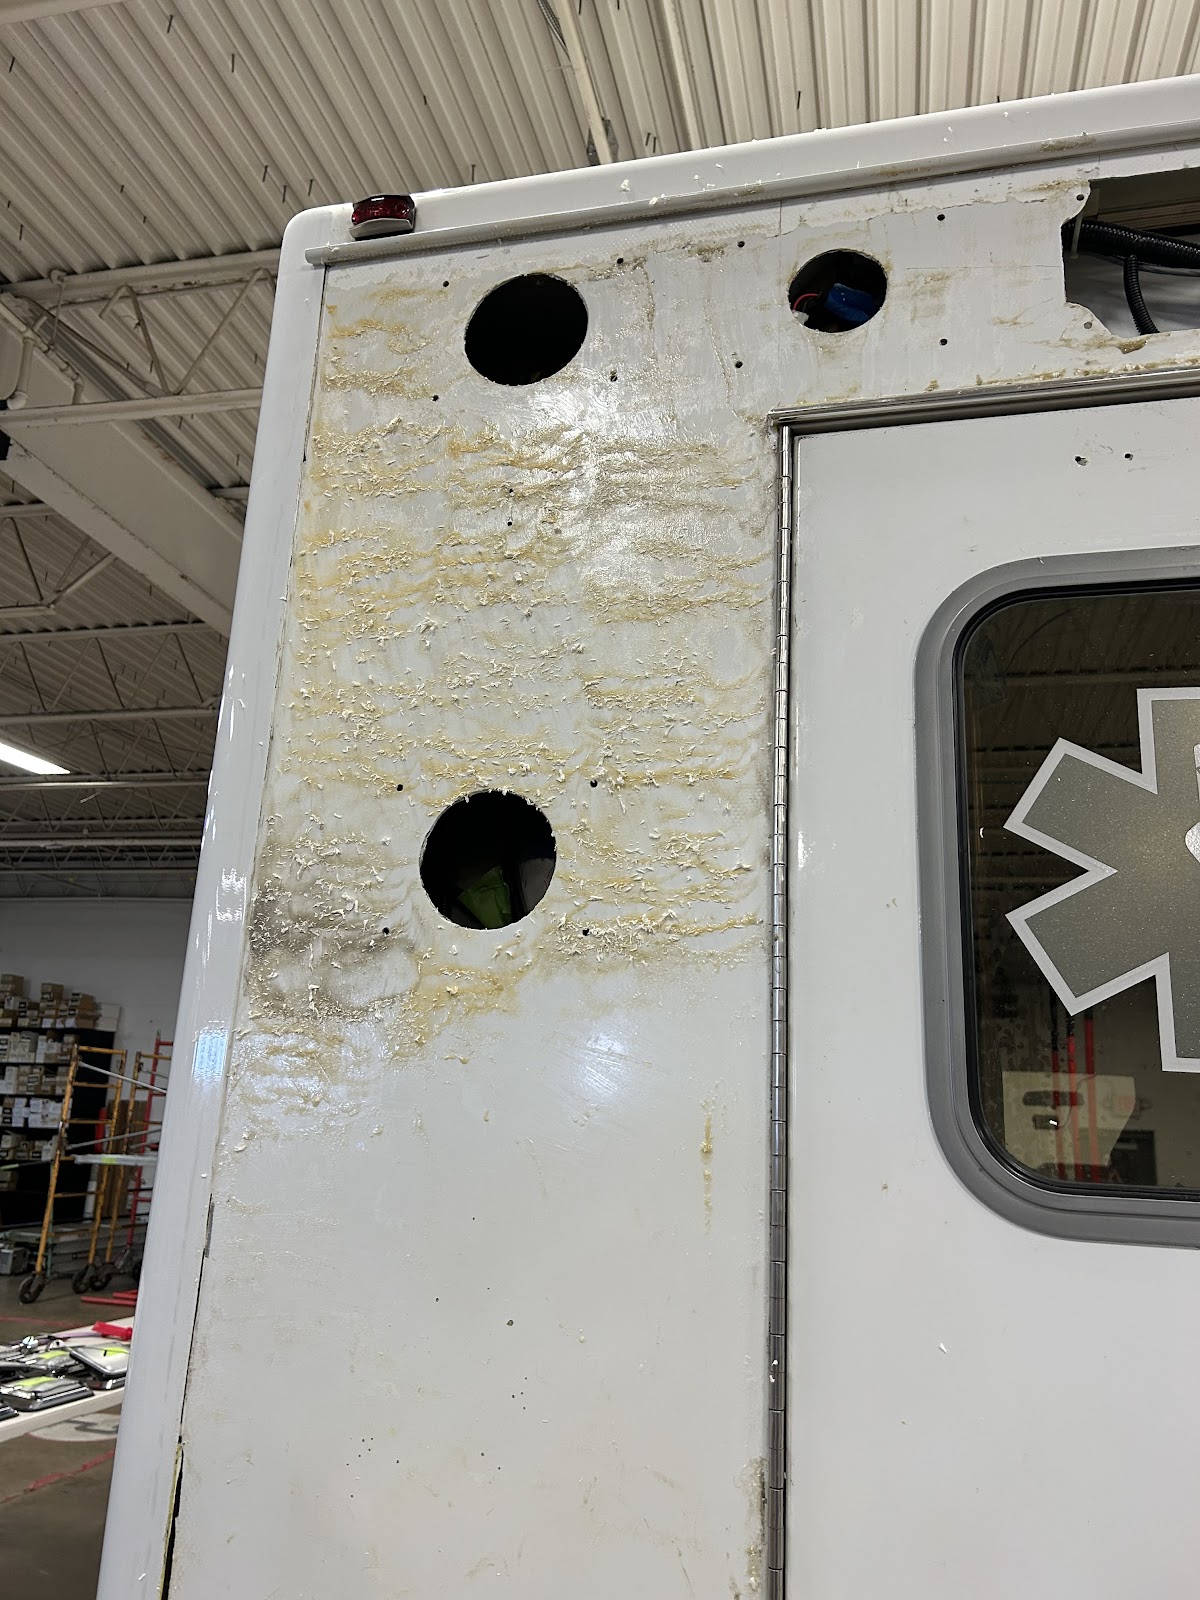 Sticky residue left behind on an emergency vehicle